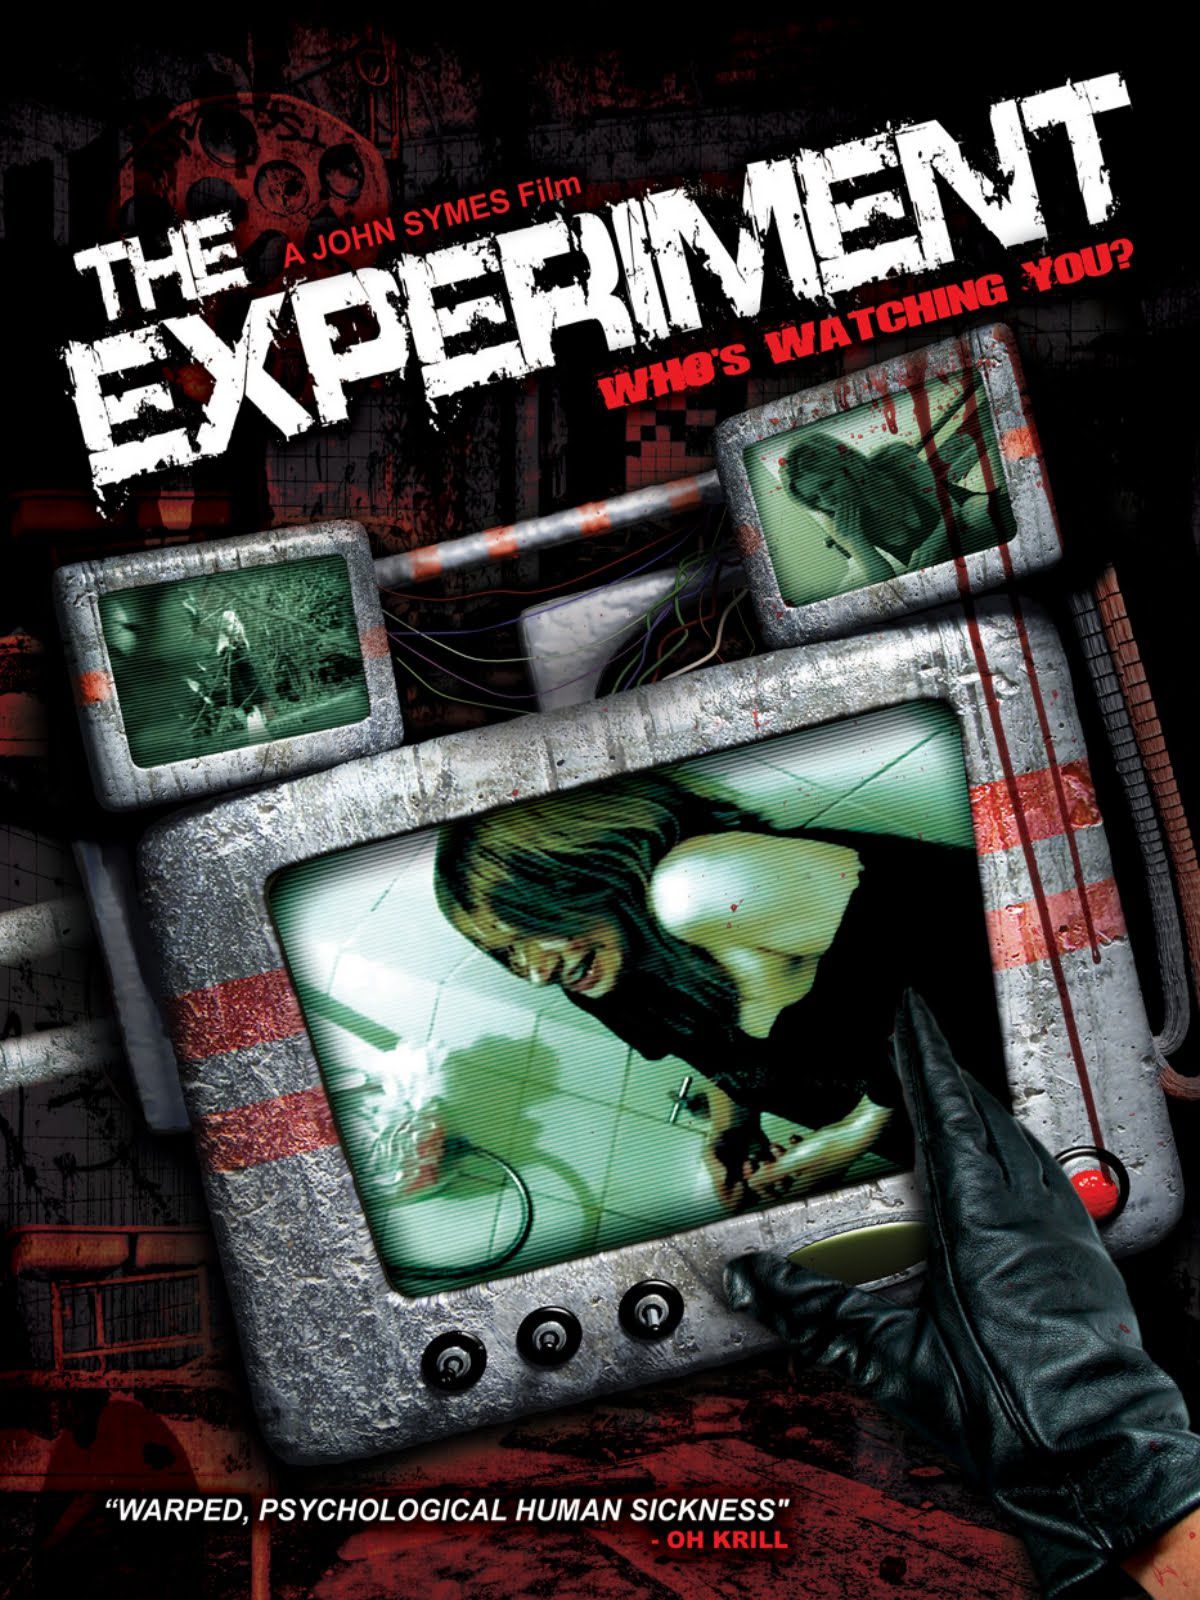 The Experiment: Who's Watching You? - Film (2012) streaming VF gratuit complet